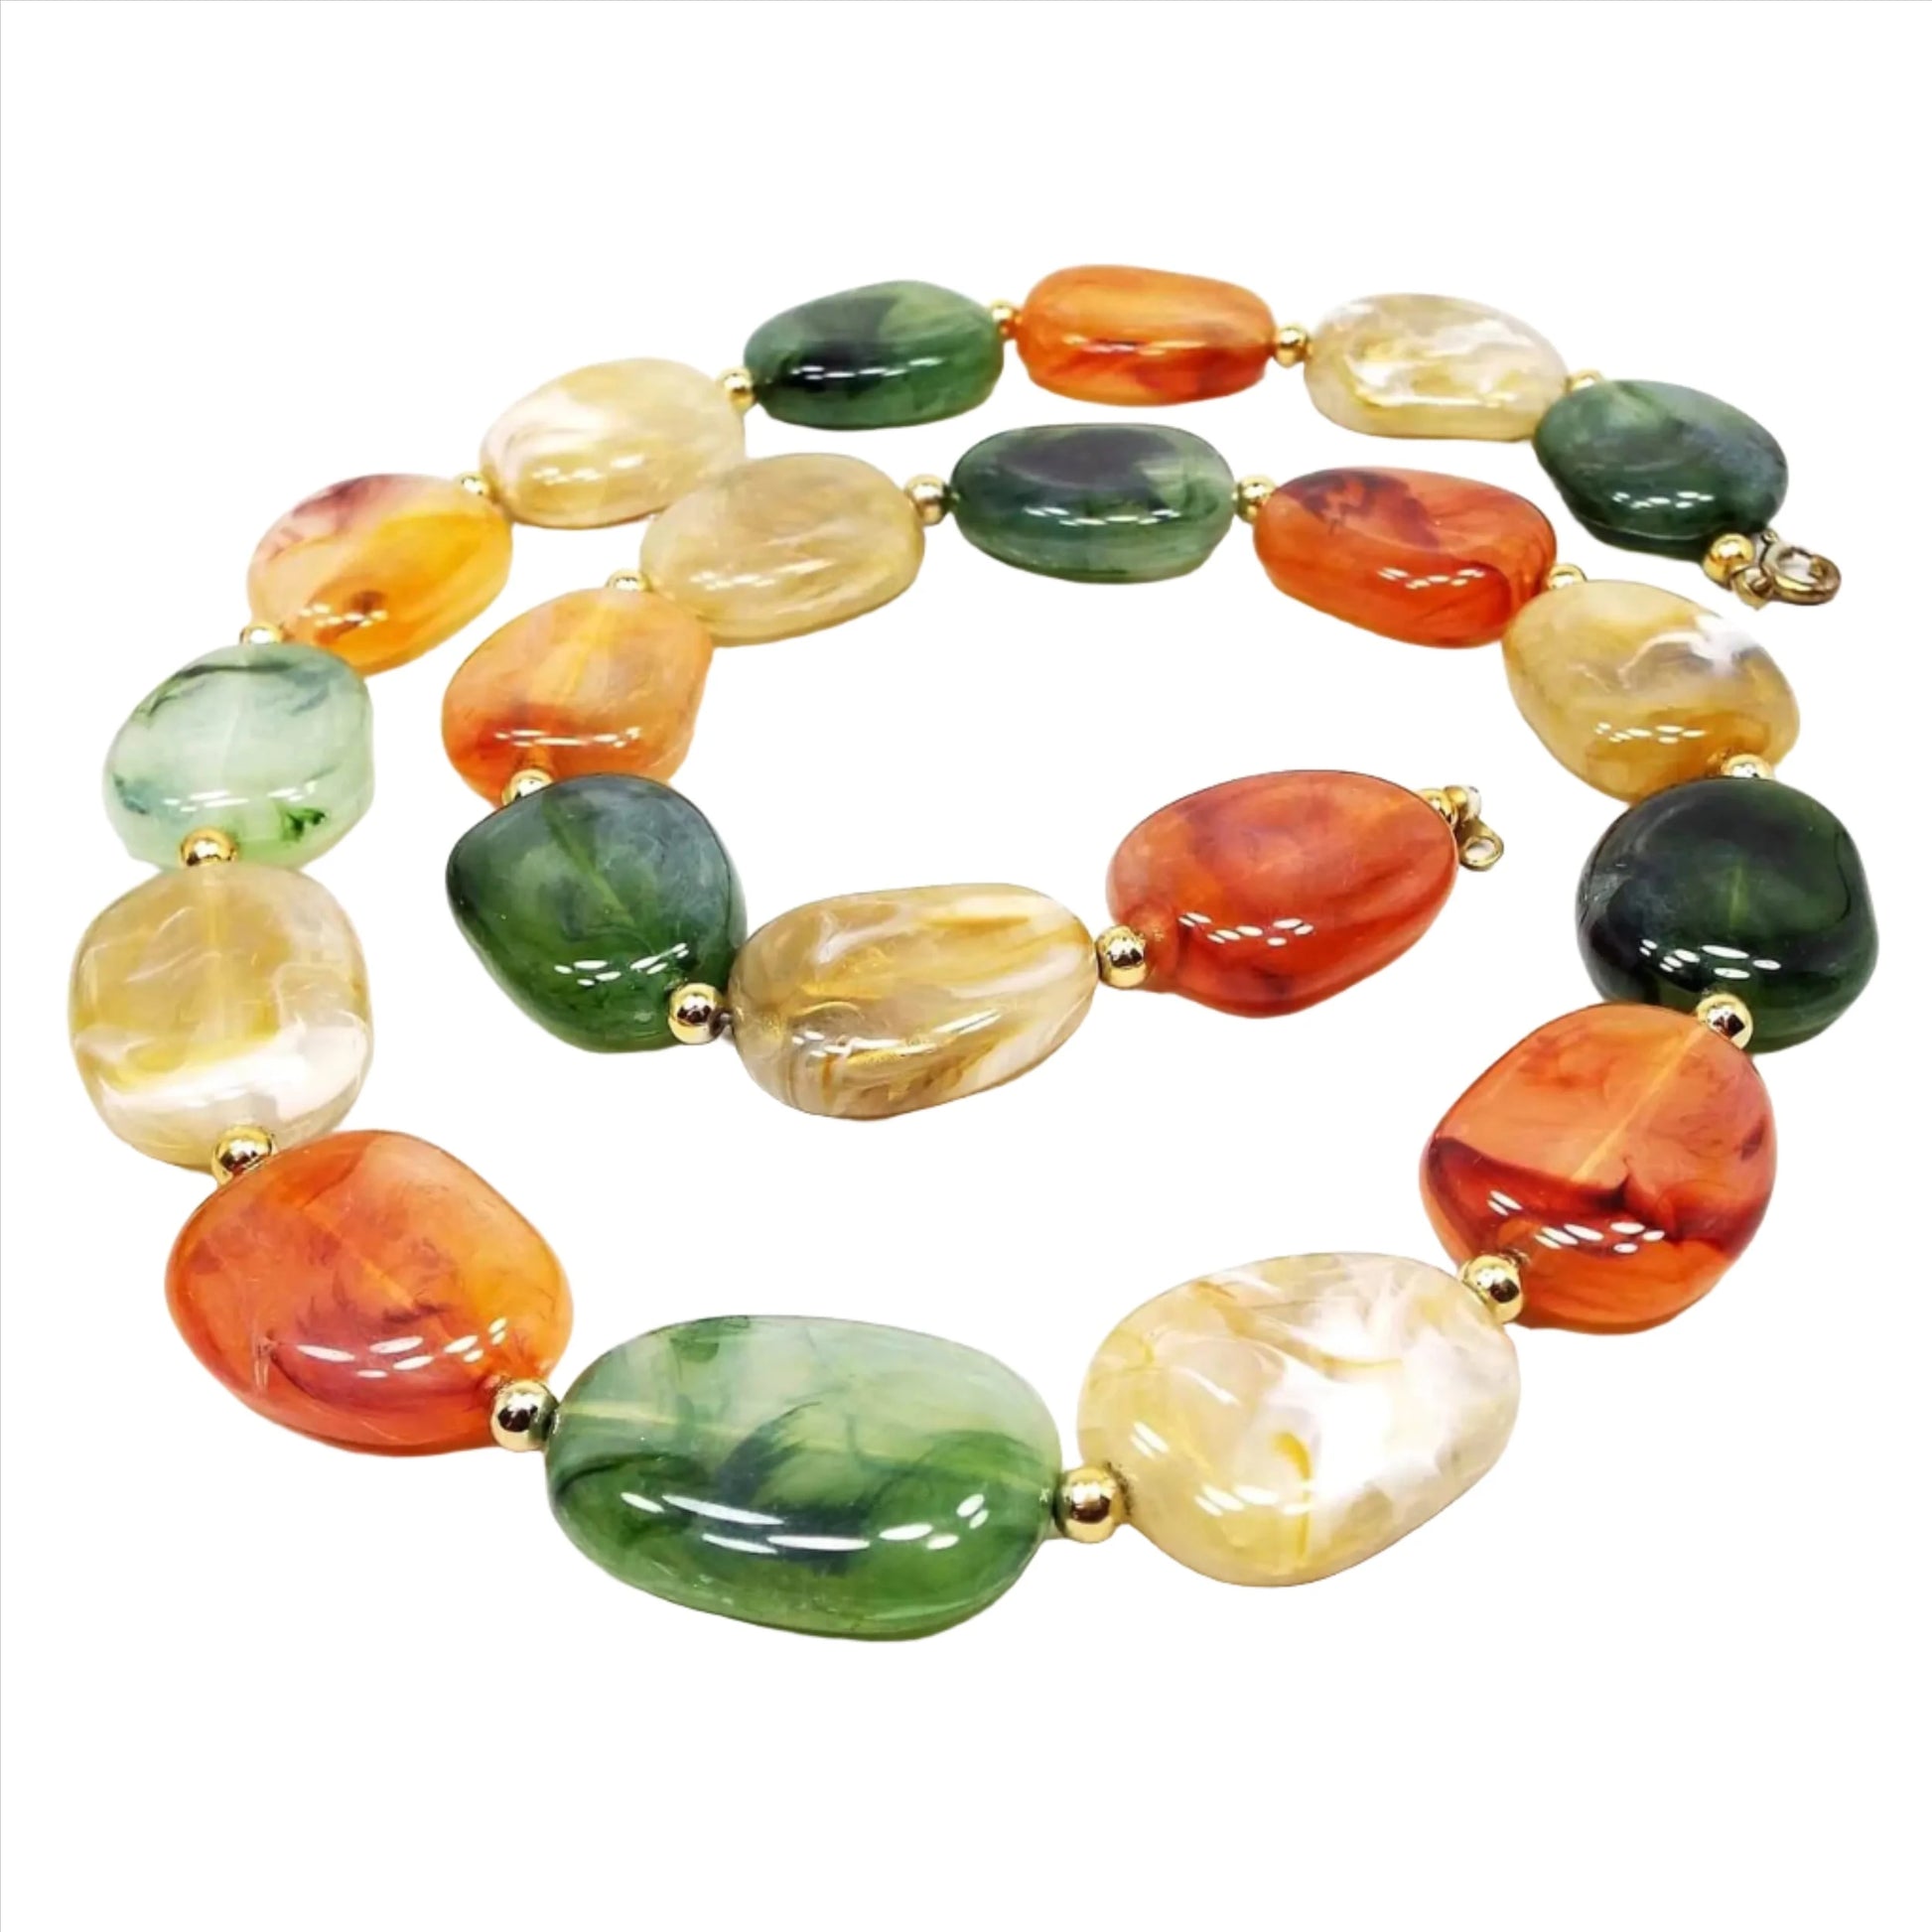 Front view of the retro vintage lucite beaded necklace. The are flat freeform shape beads. There are beads with marbled shades of orange, yellow, and green with small gold tone metal beads in between.